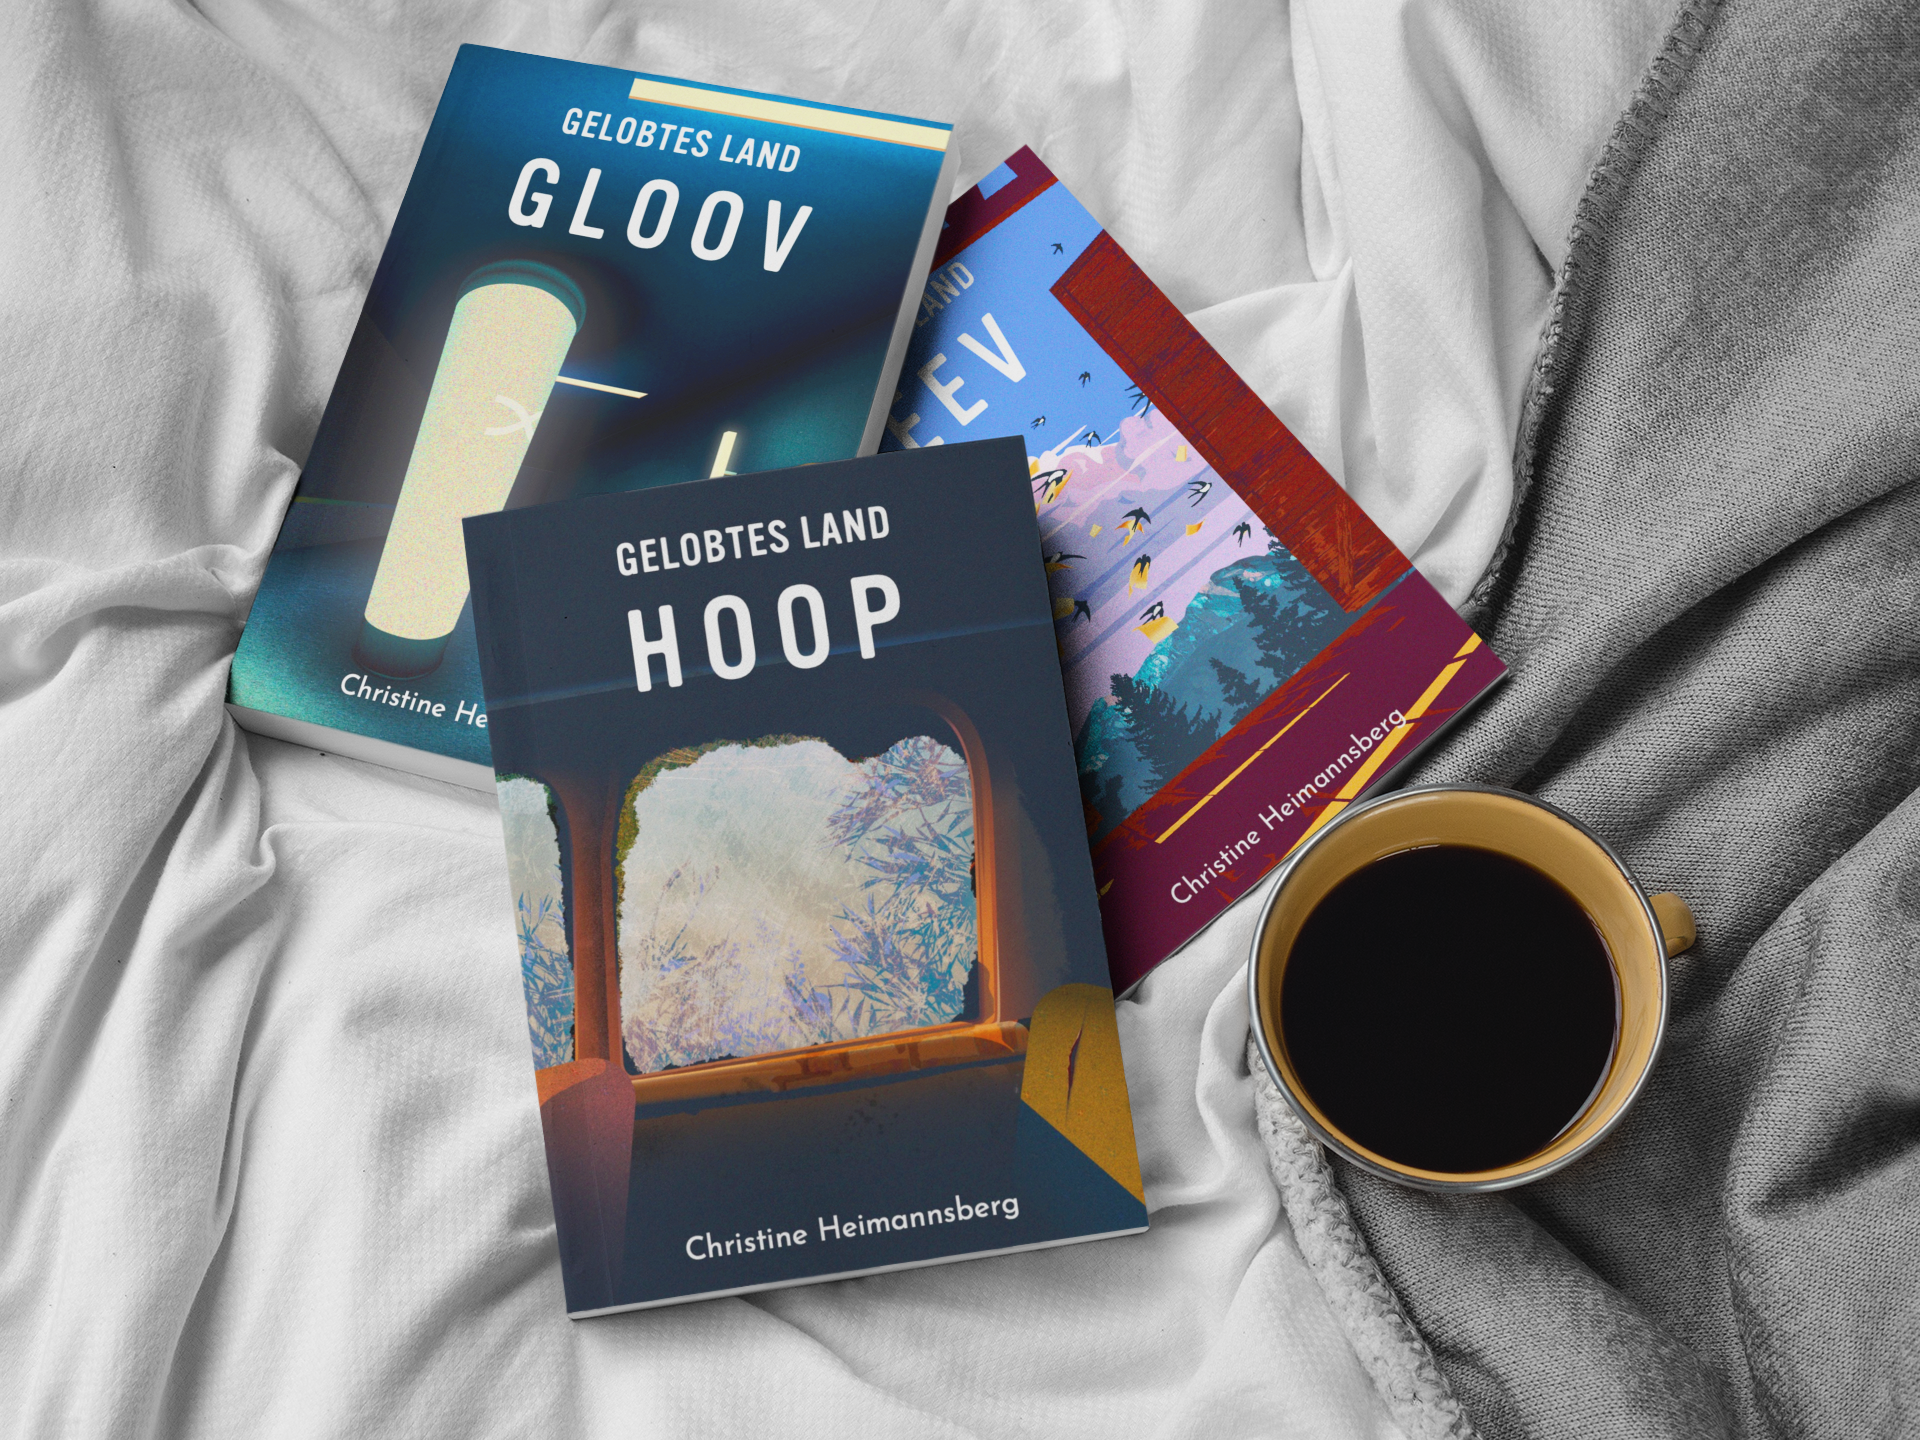 //christineheimannsberg.de/wp-content/uploads/2020/05/three-messy-books-mockup-on-a-bed-near-a-coffee-cup-a17404.png